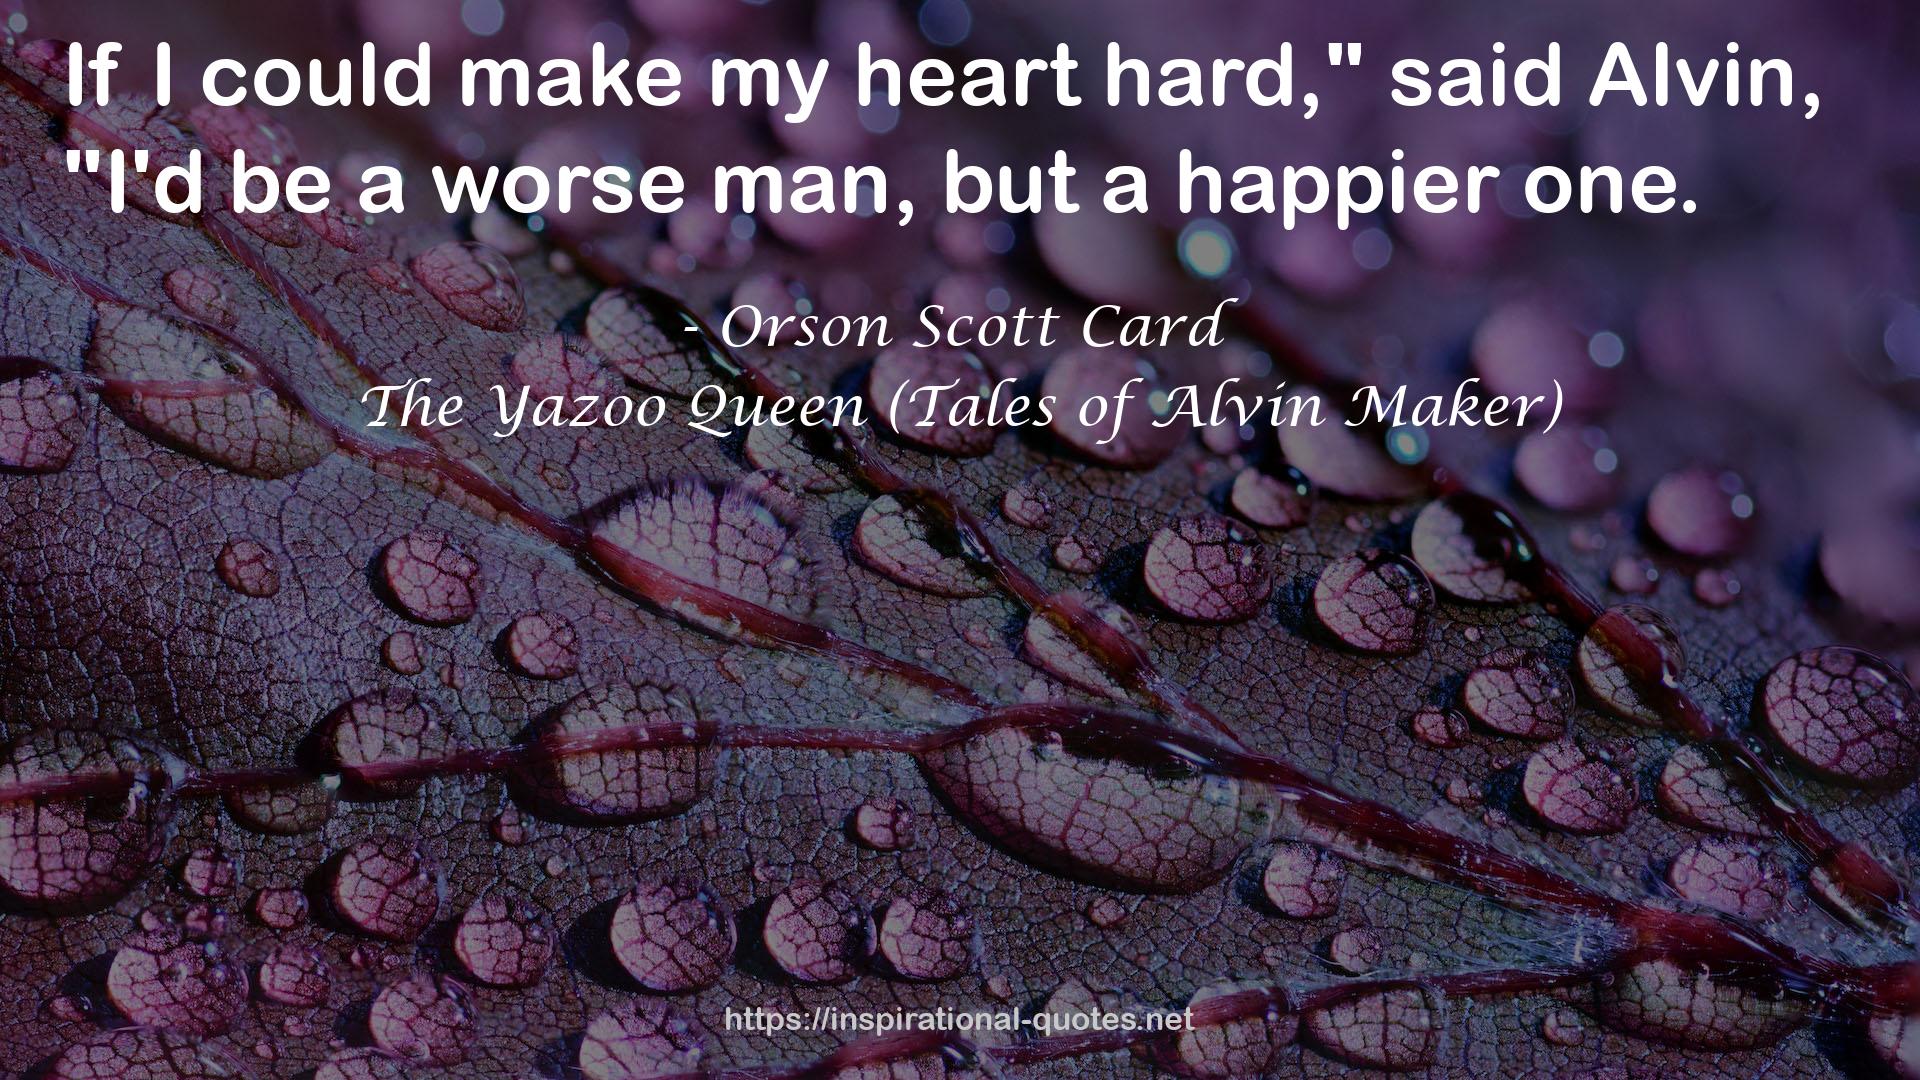 The Yazoo Queen (Tales of Alvin Maker) QUOTES